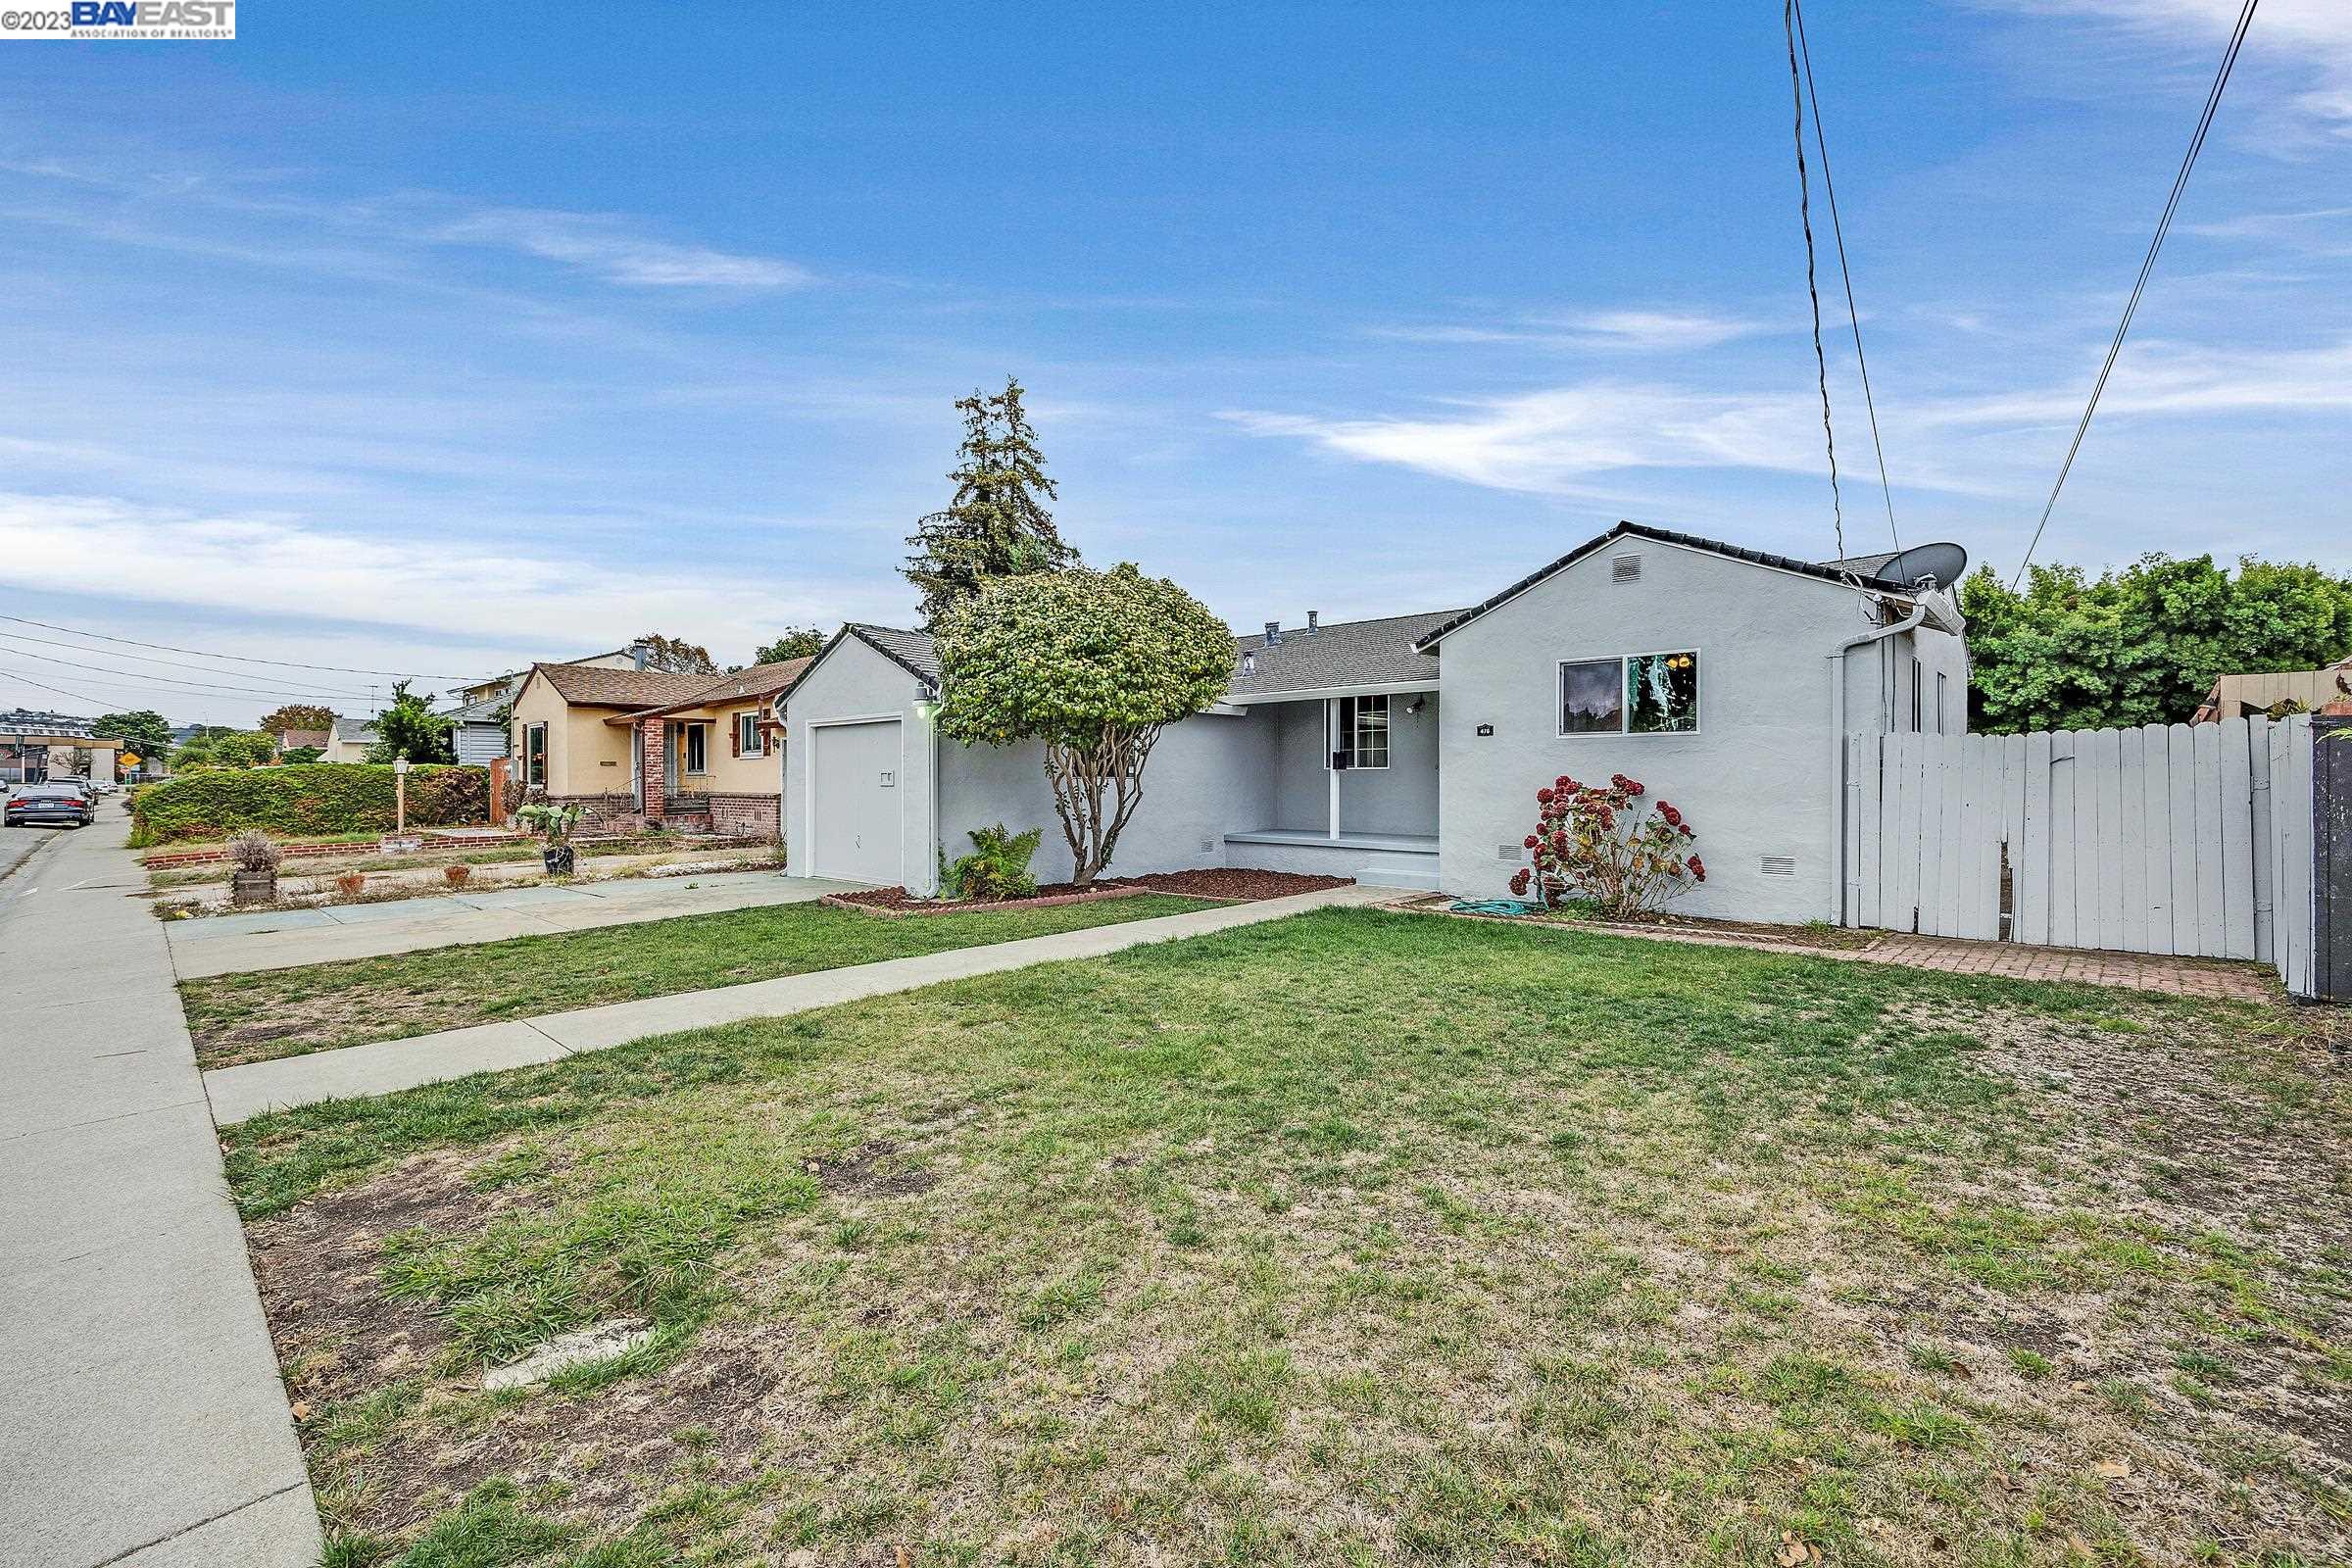 Great San Leandro location! Near shopping and commute arteries! New furnace installed November 2023! Freshly painted interior/exterior. Hardwood and Laminate flooring! Good sized yard with gated side access! Large shed in back yard provides lots of storage!